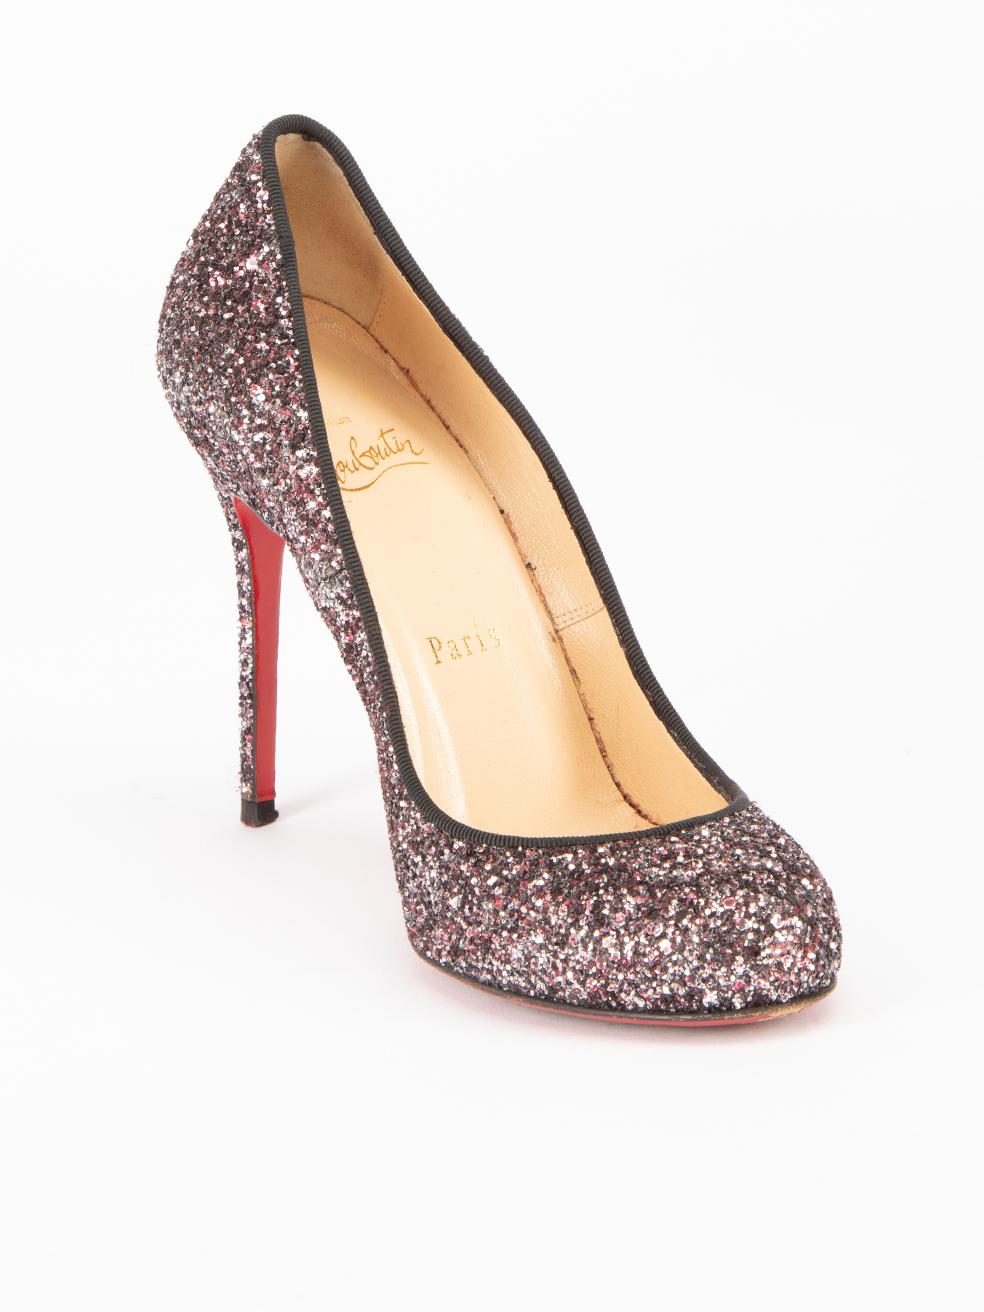 CONDITION is Very good. Hardly any visible wear to shoes is evident on this used Christian Louboutin designer resale item. This item comes with original dustbags. 
 
 Details
  Purple
 Glitter
 Slip on heels
 Round toe
 High heels
 Leather interior
